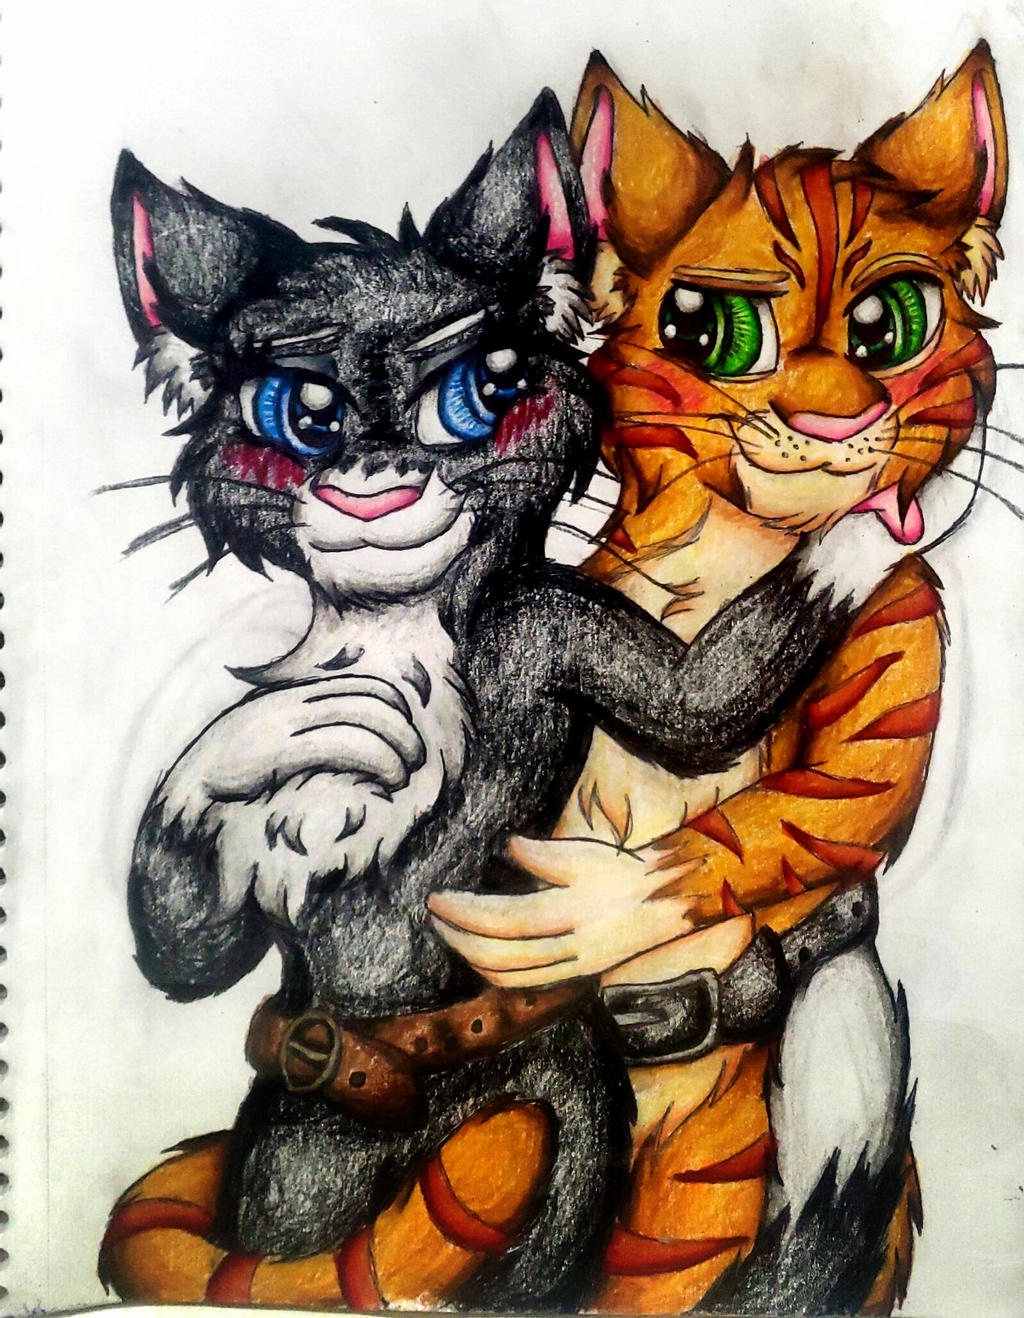 Kitty and Puss by SugarPop